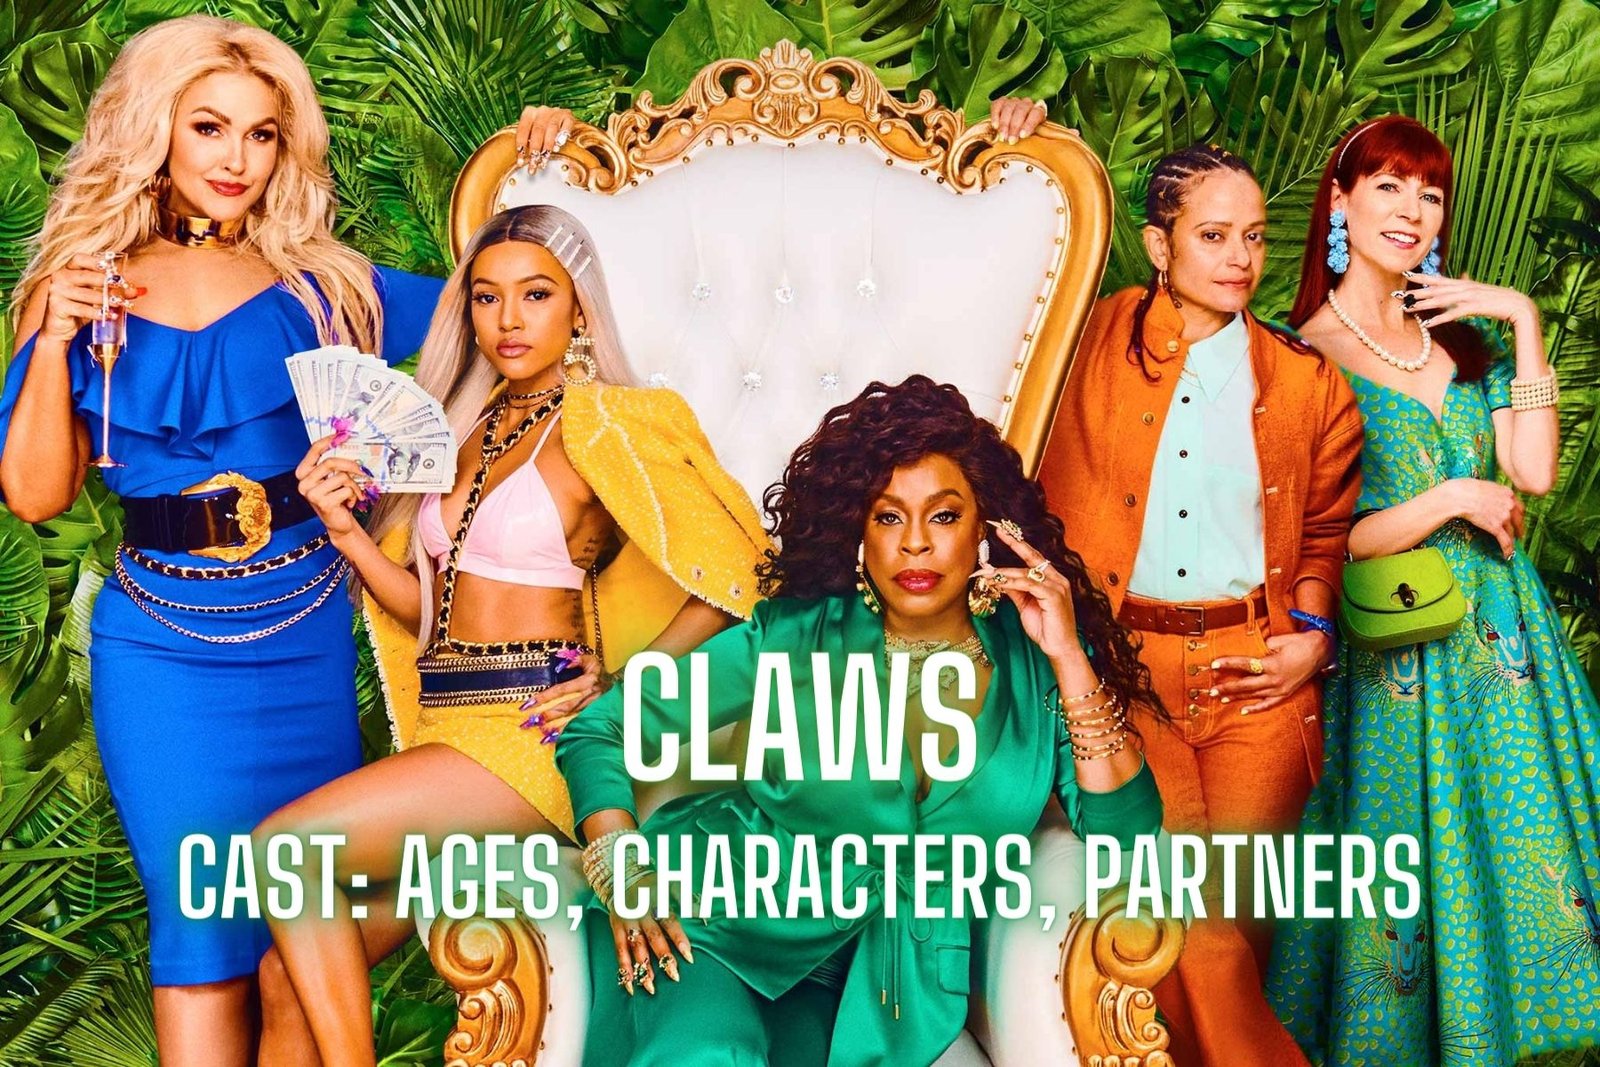 Claws Cast - Ages, Partners, Characters